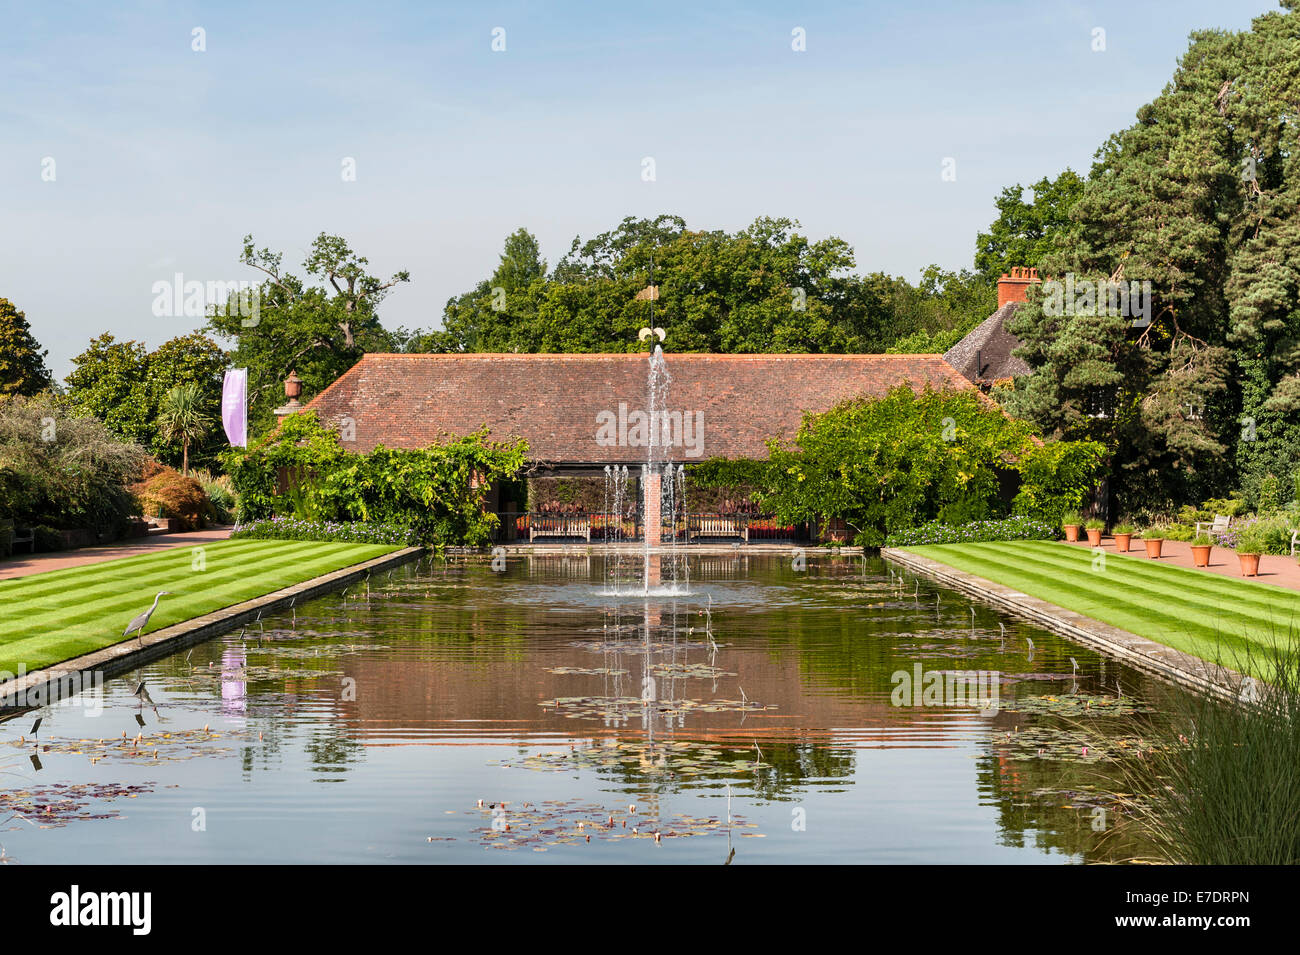 The Royal Horticultural Society (RHS) gardens, Wisley, Surrey, UK. View down the canal towards the loggia Stock Photo